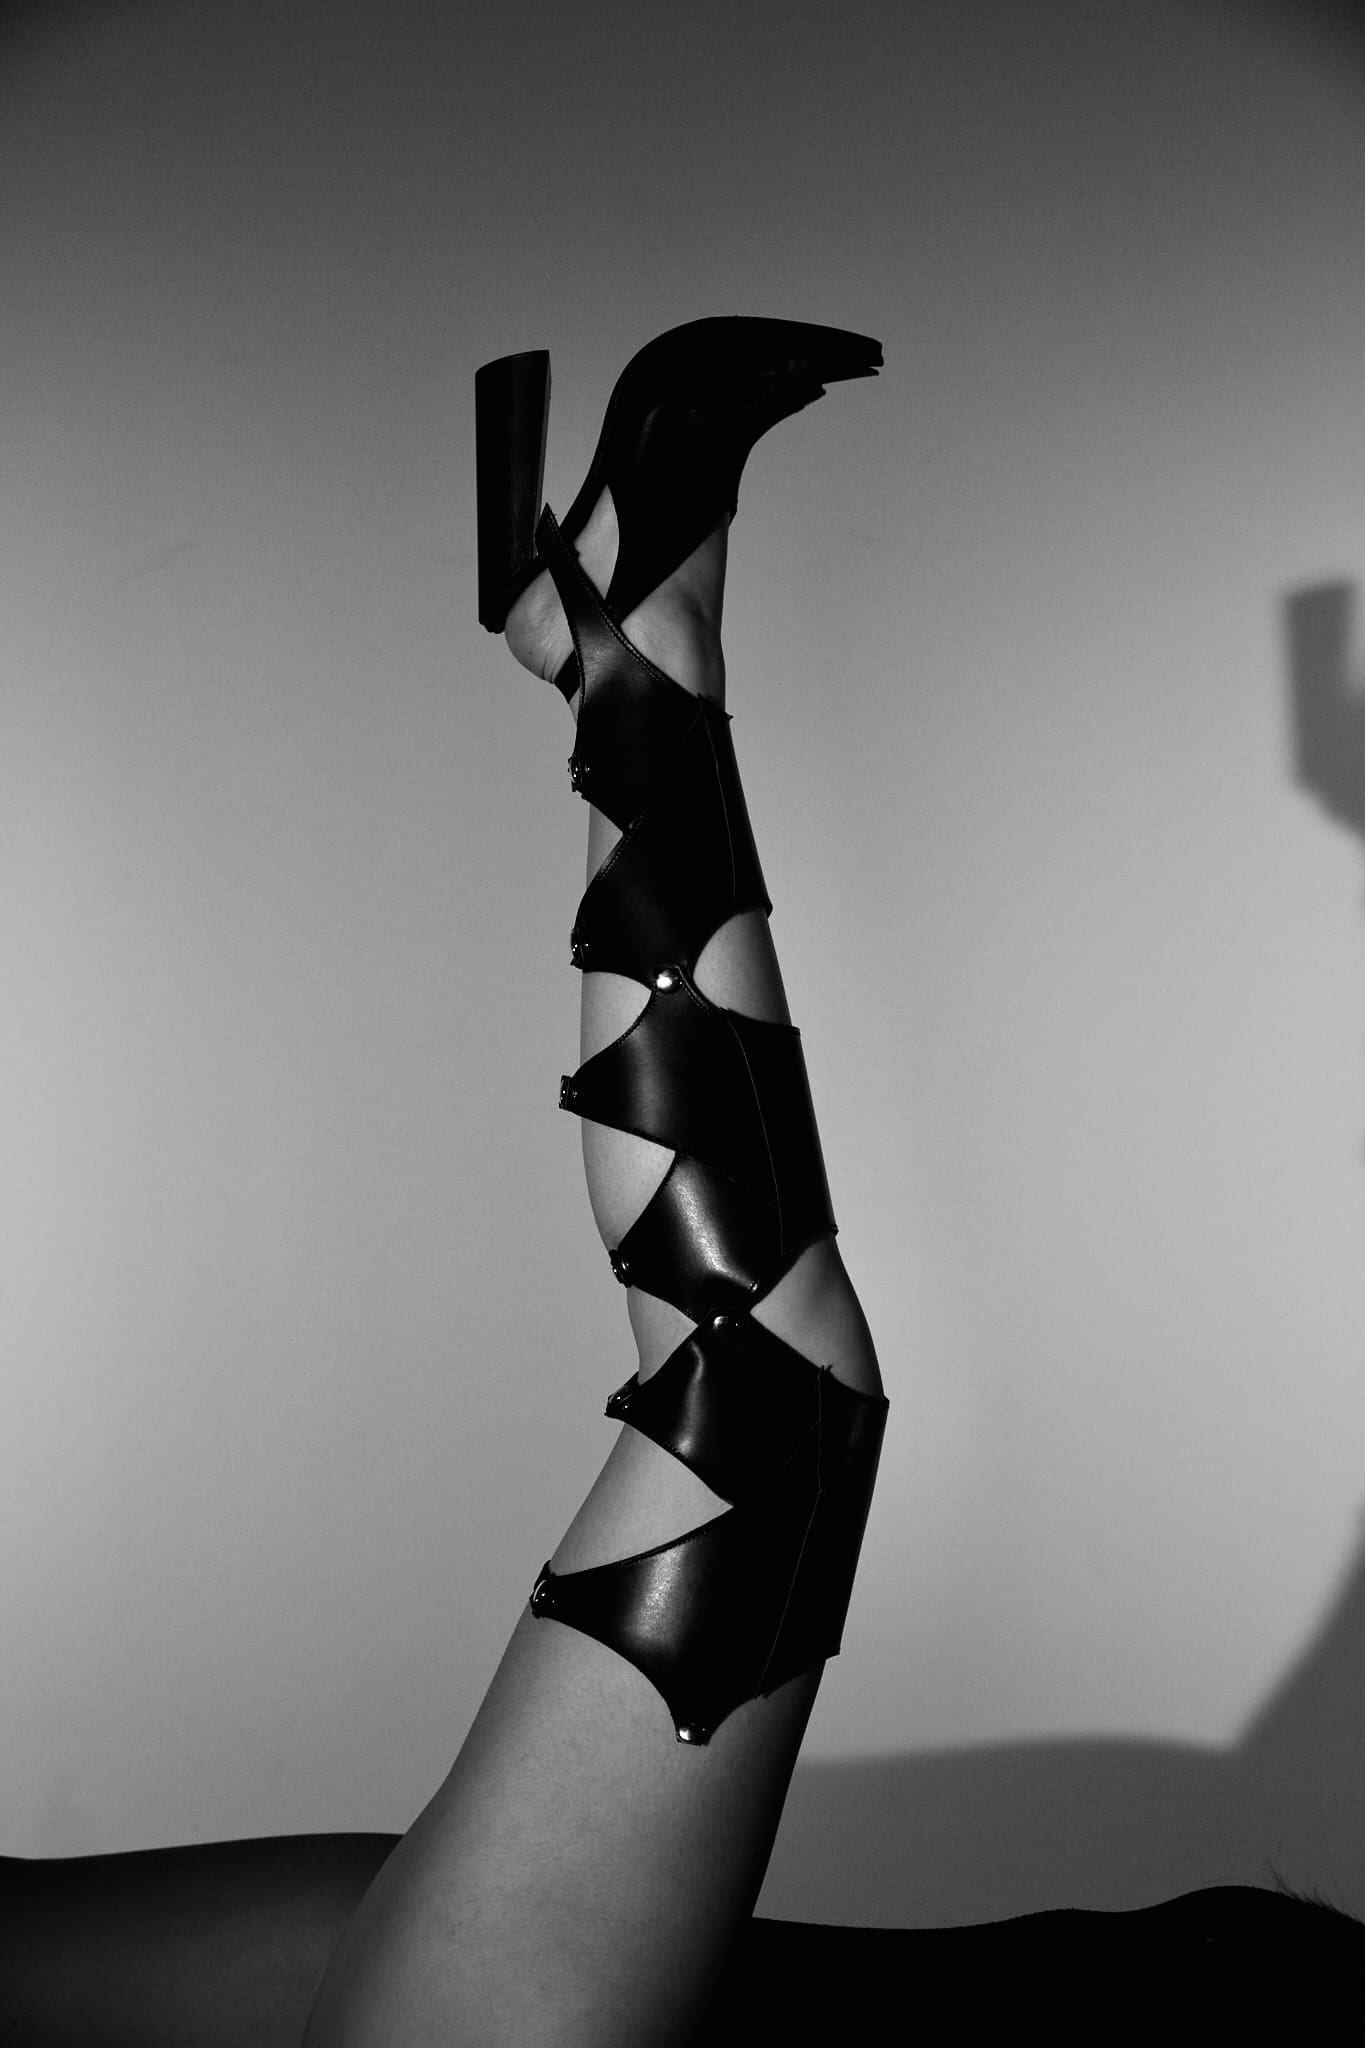 Nikki Park. Black and white photo of a model's leg held in the air, wearing a Modular Boot inspired by the concept of “Han” (Korean Rage). The knee high boot has multiple diamond-shaped cut-outs going up the leg.